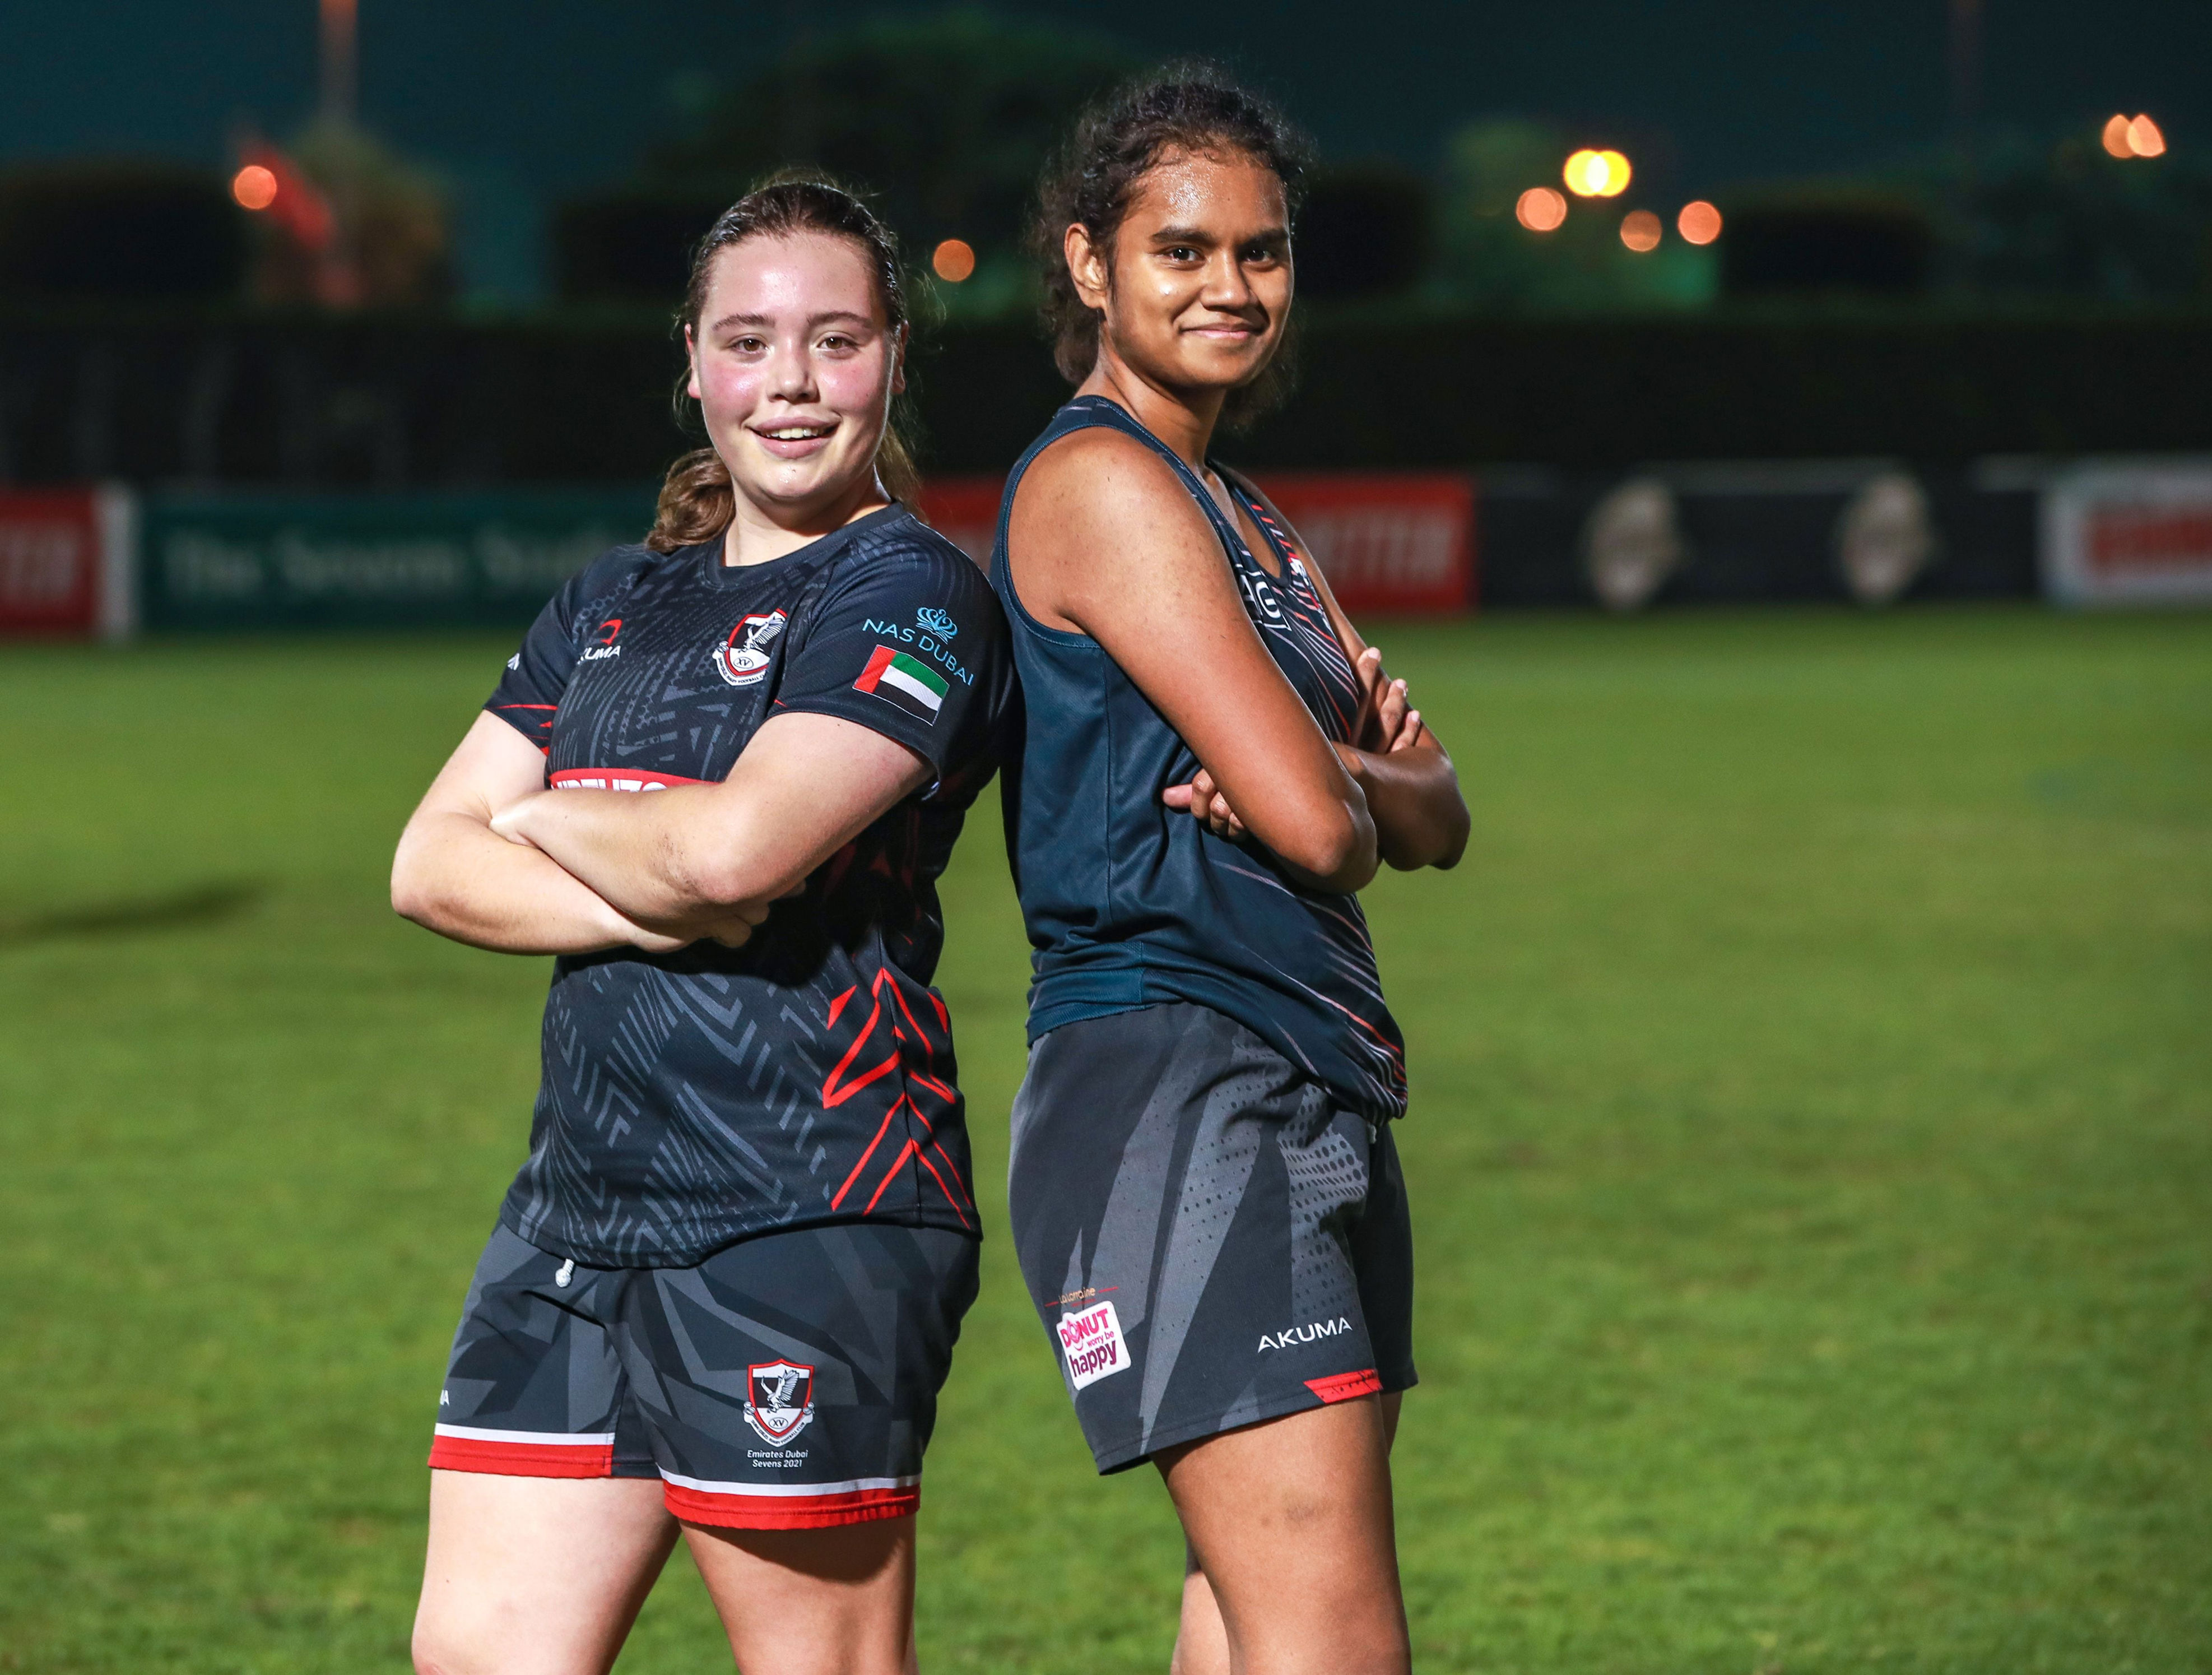 age-group players take centre stage at hsbc rugby festival dubai